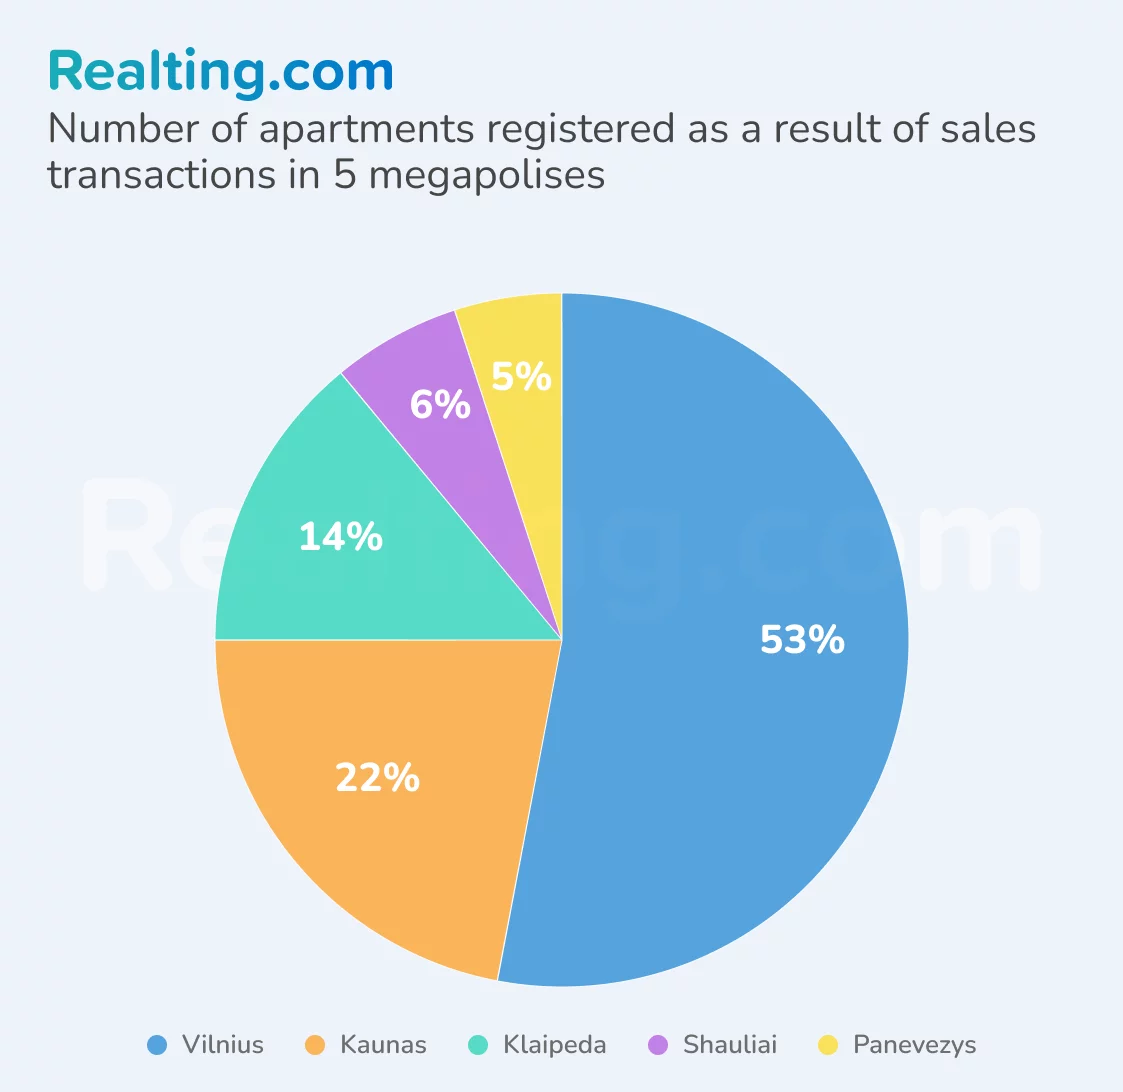 Number of apartments registered as a result of purchase and sale transactions in 5 megacities of the country